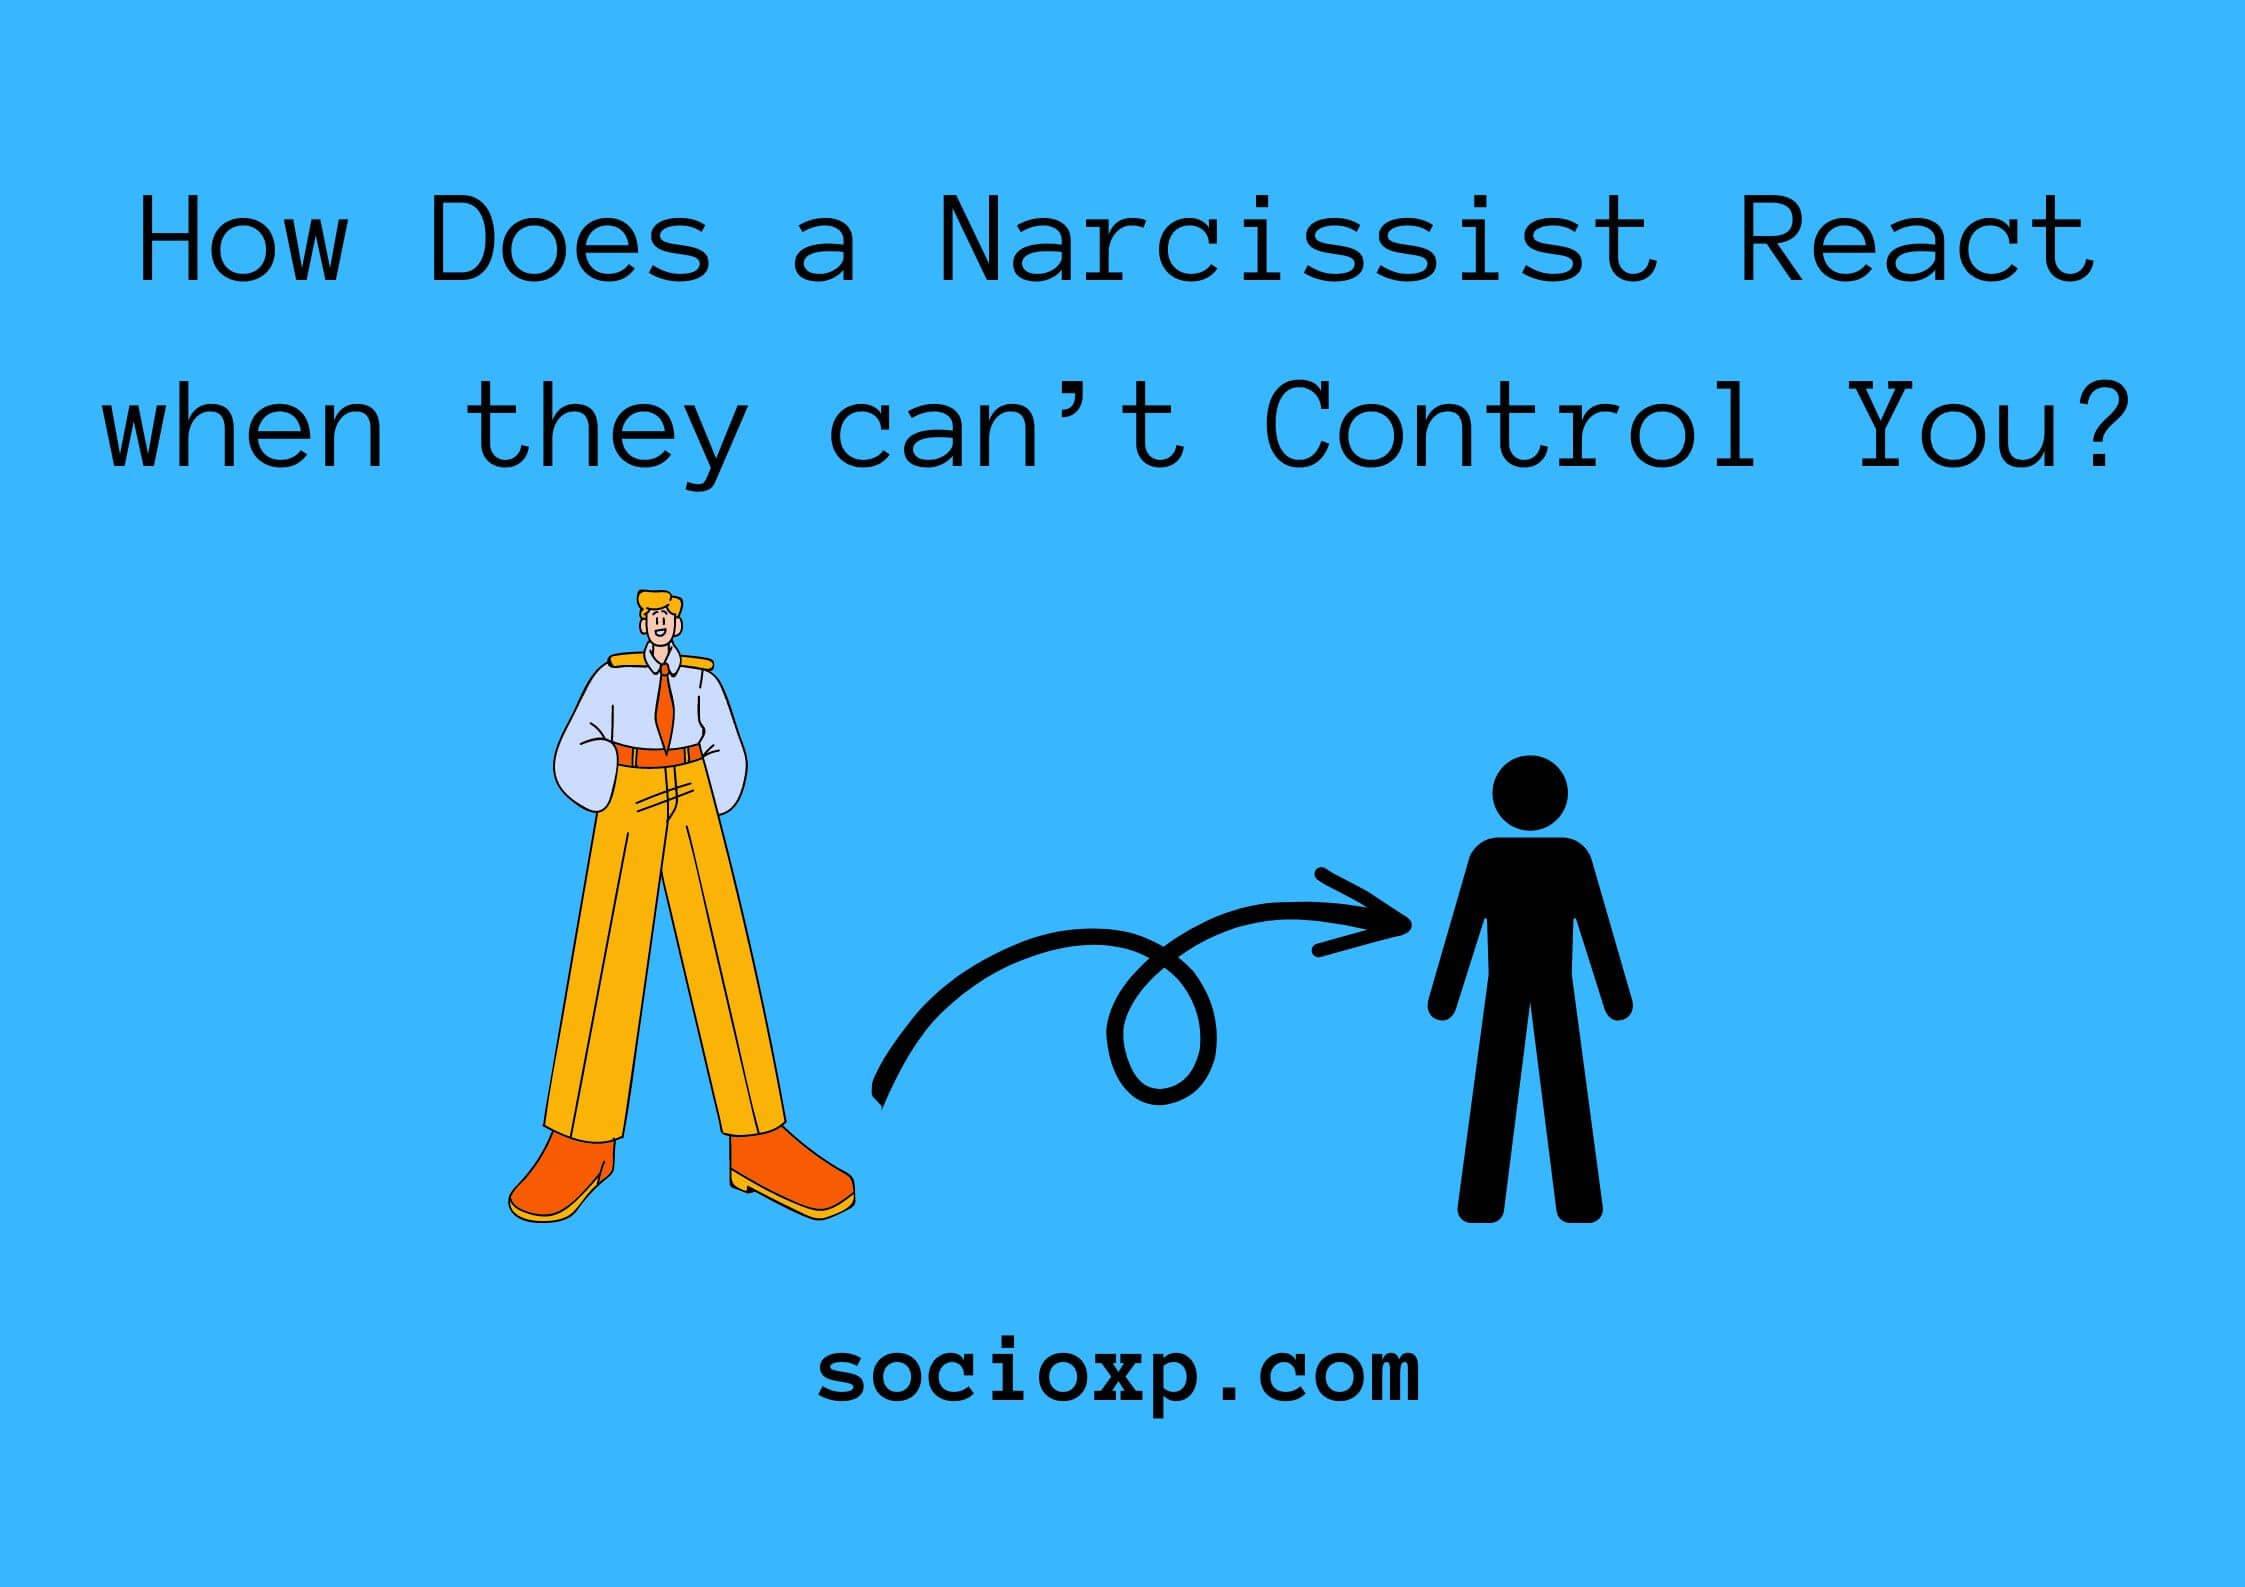 How Does a Narcissist React when they cannot Control You?